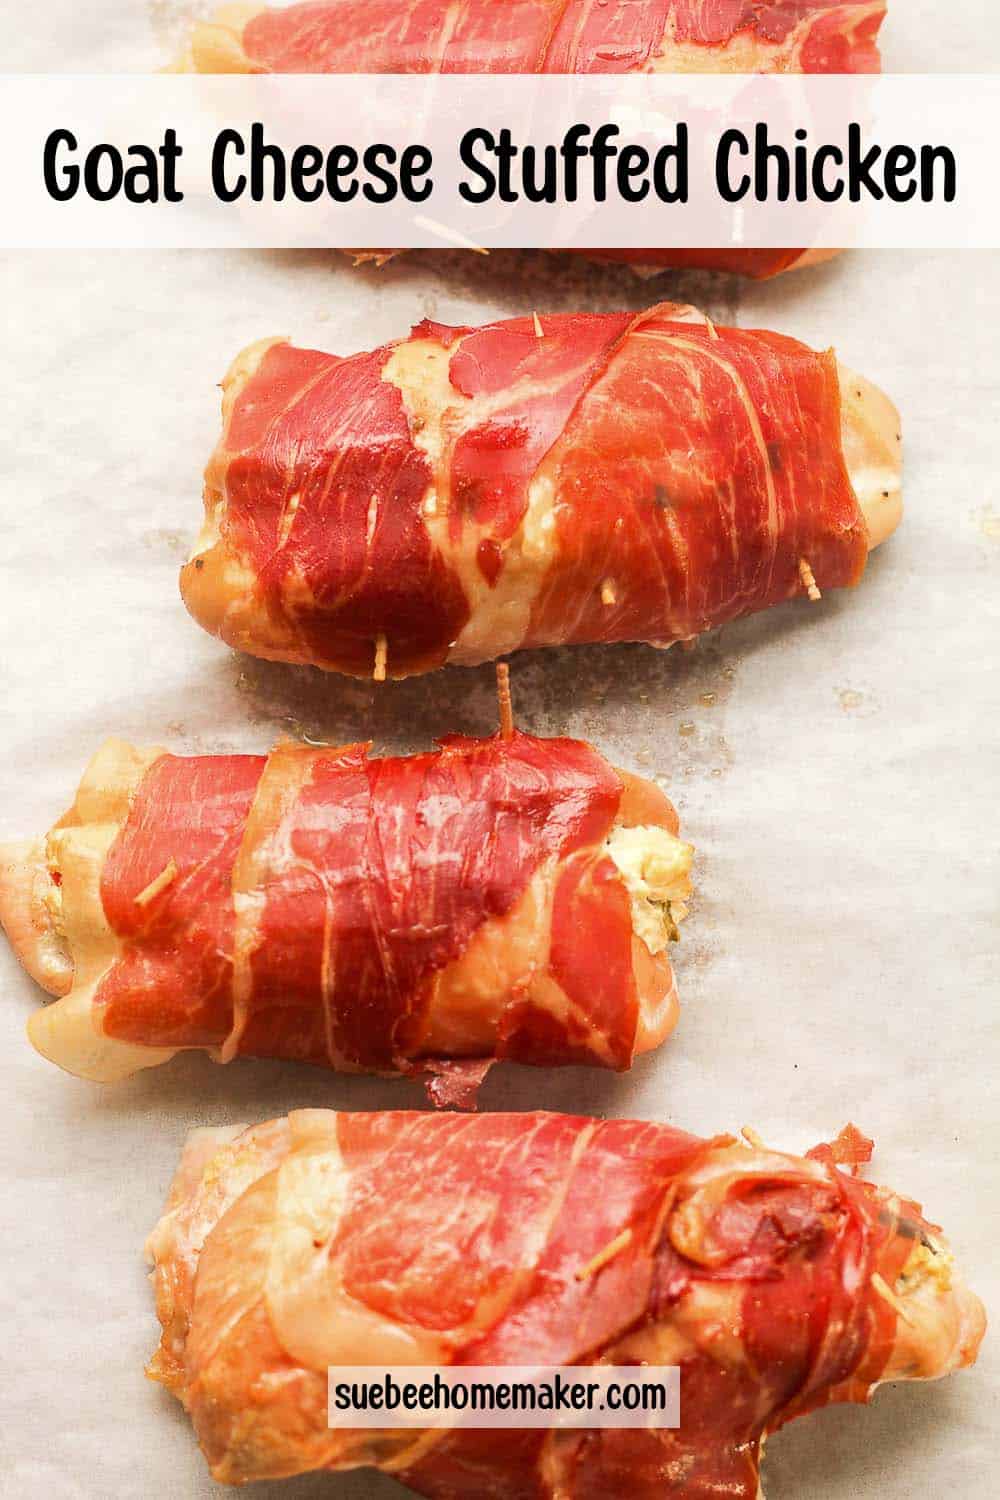 A tray of goat cheese stuffed chicken wrapped in parma ham.